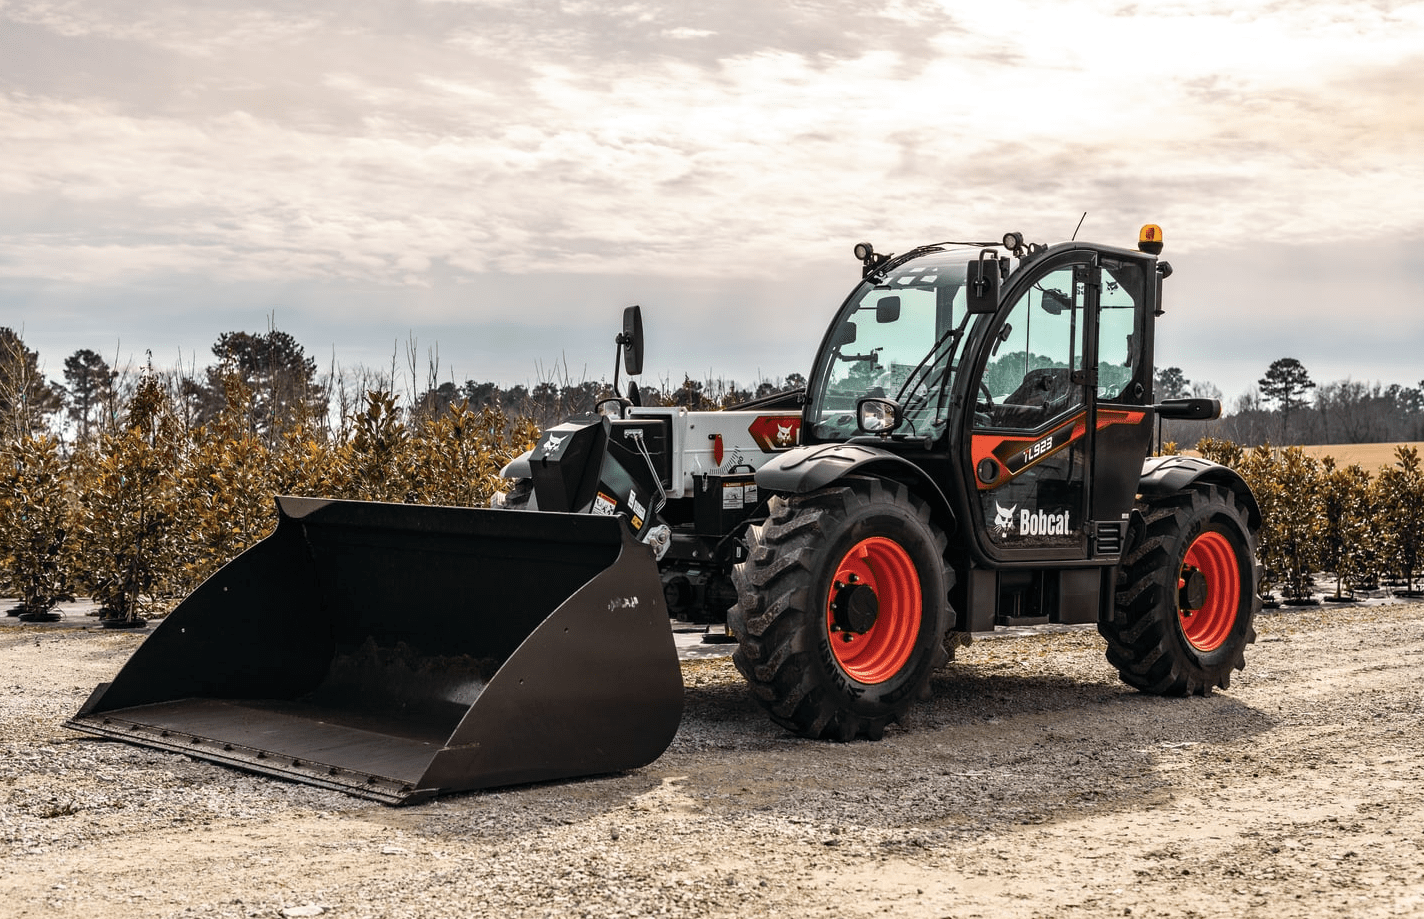 Browse Specs and more for the Bobcat TL923 Telehandler - Bobcat of North Texas